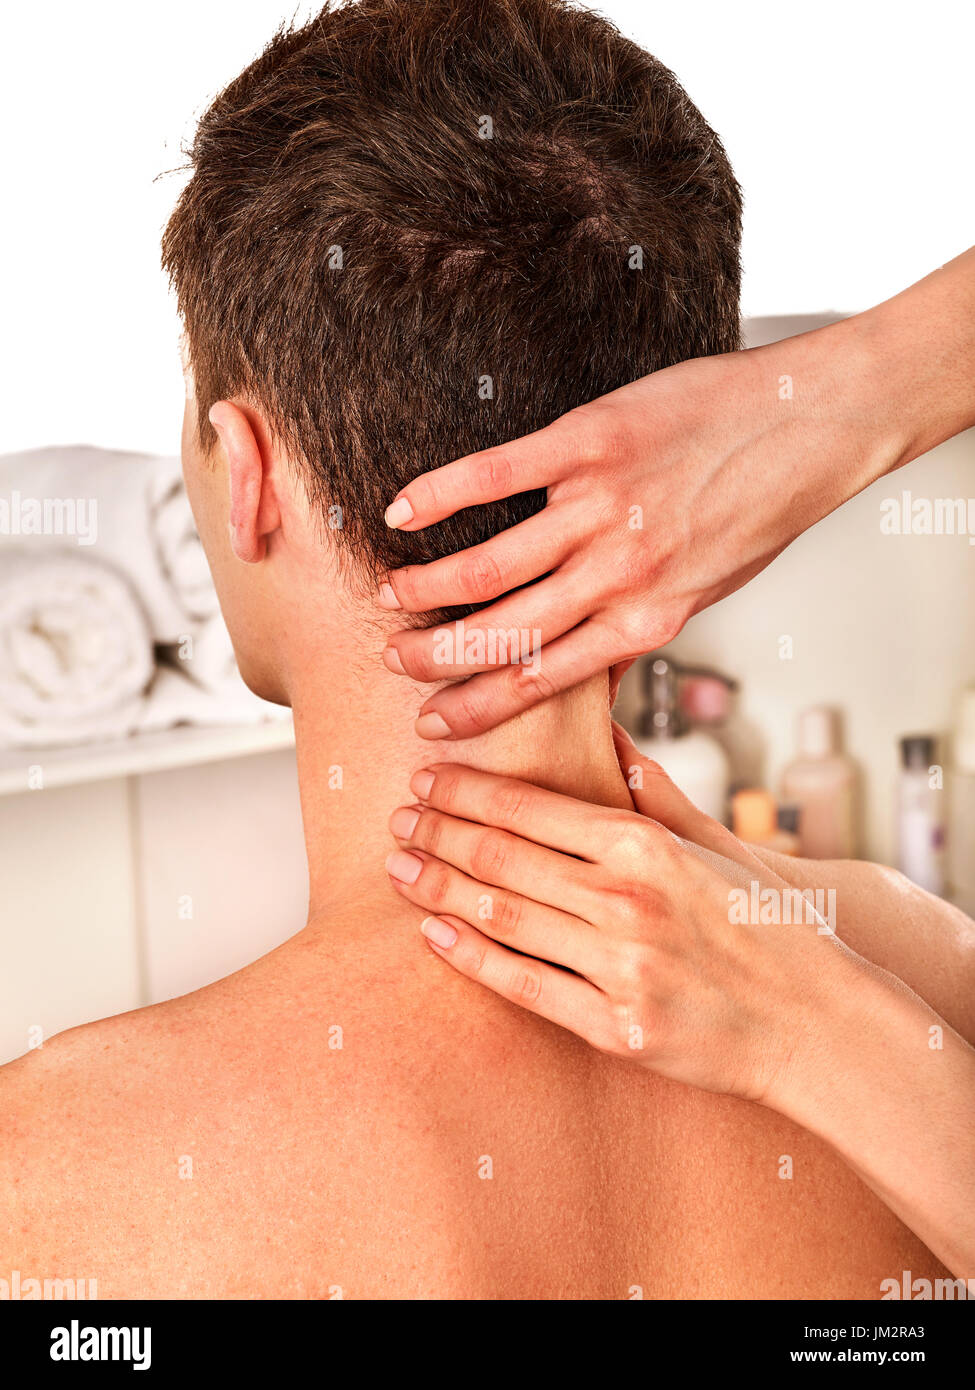 Shoulder and neck massage for man in spa salon Stock Photo - Alamy